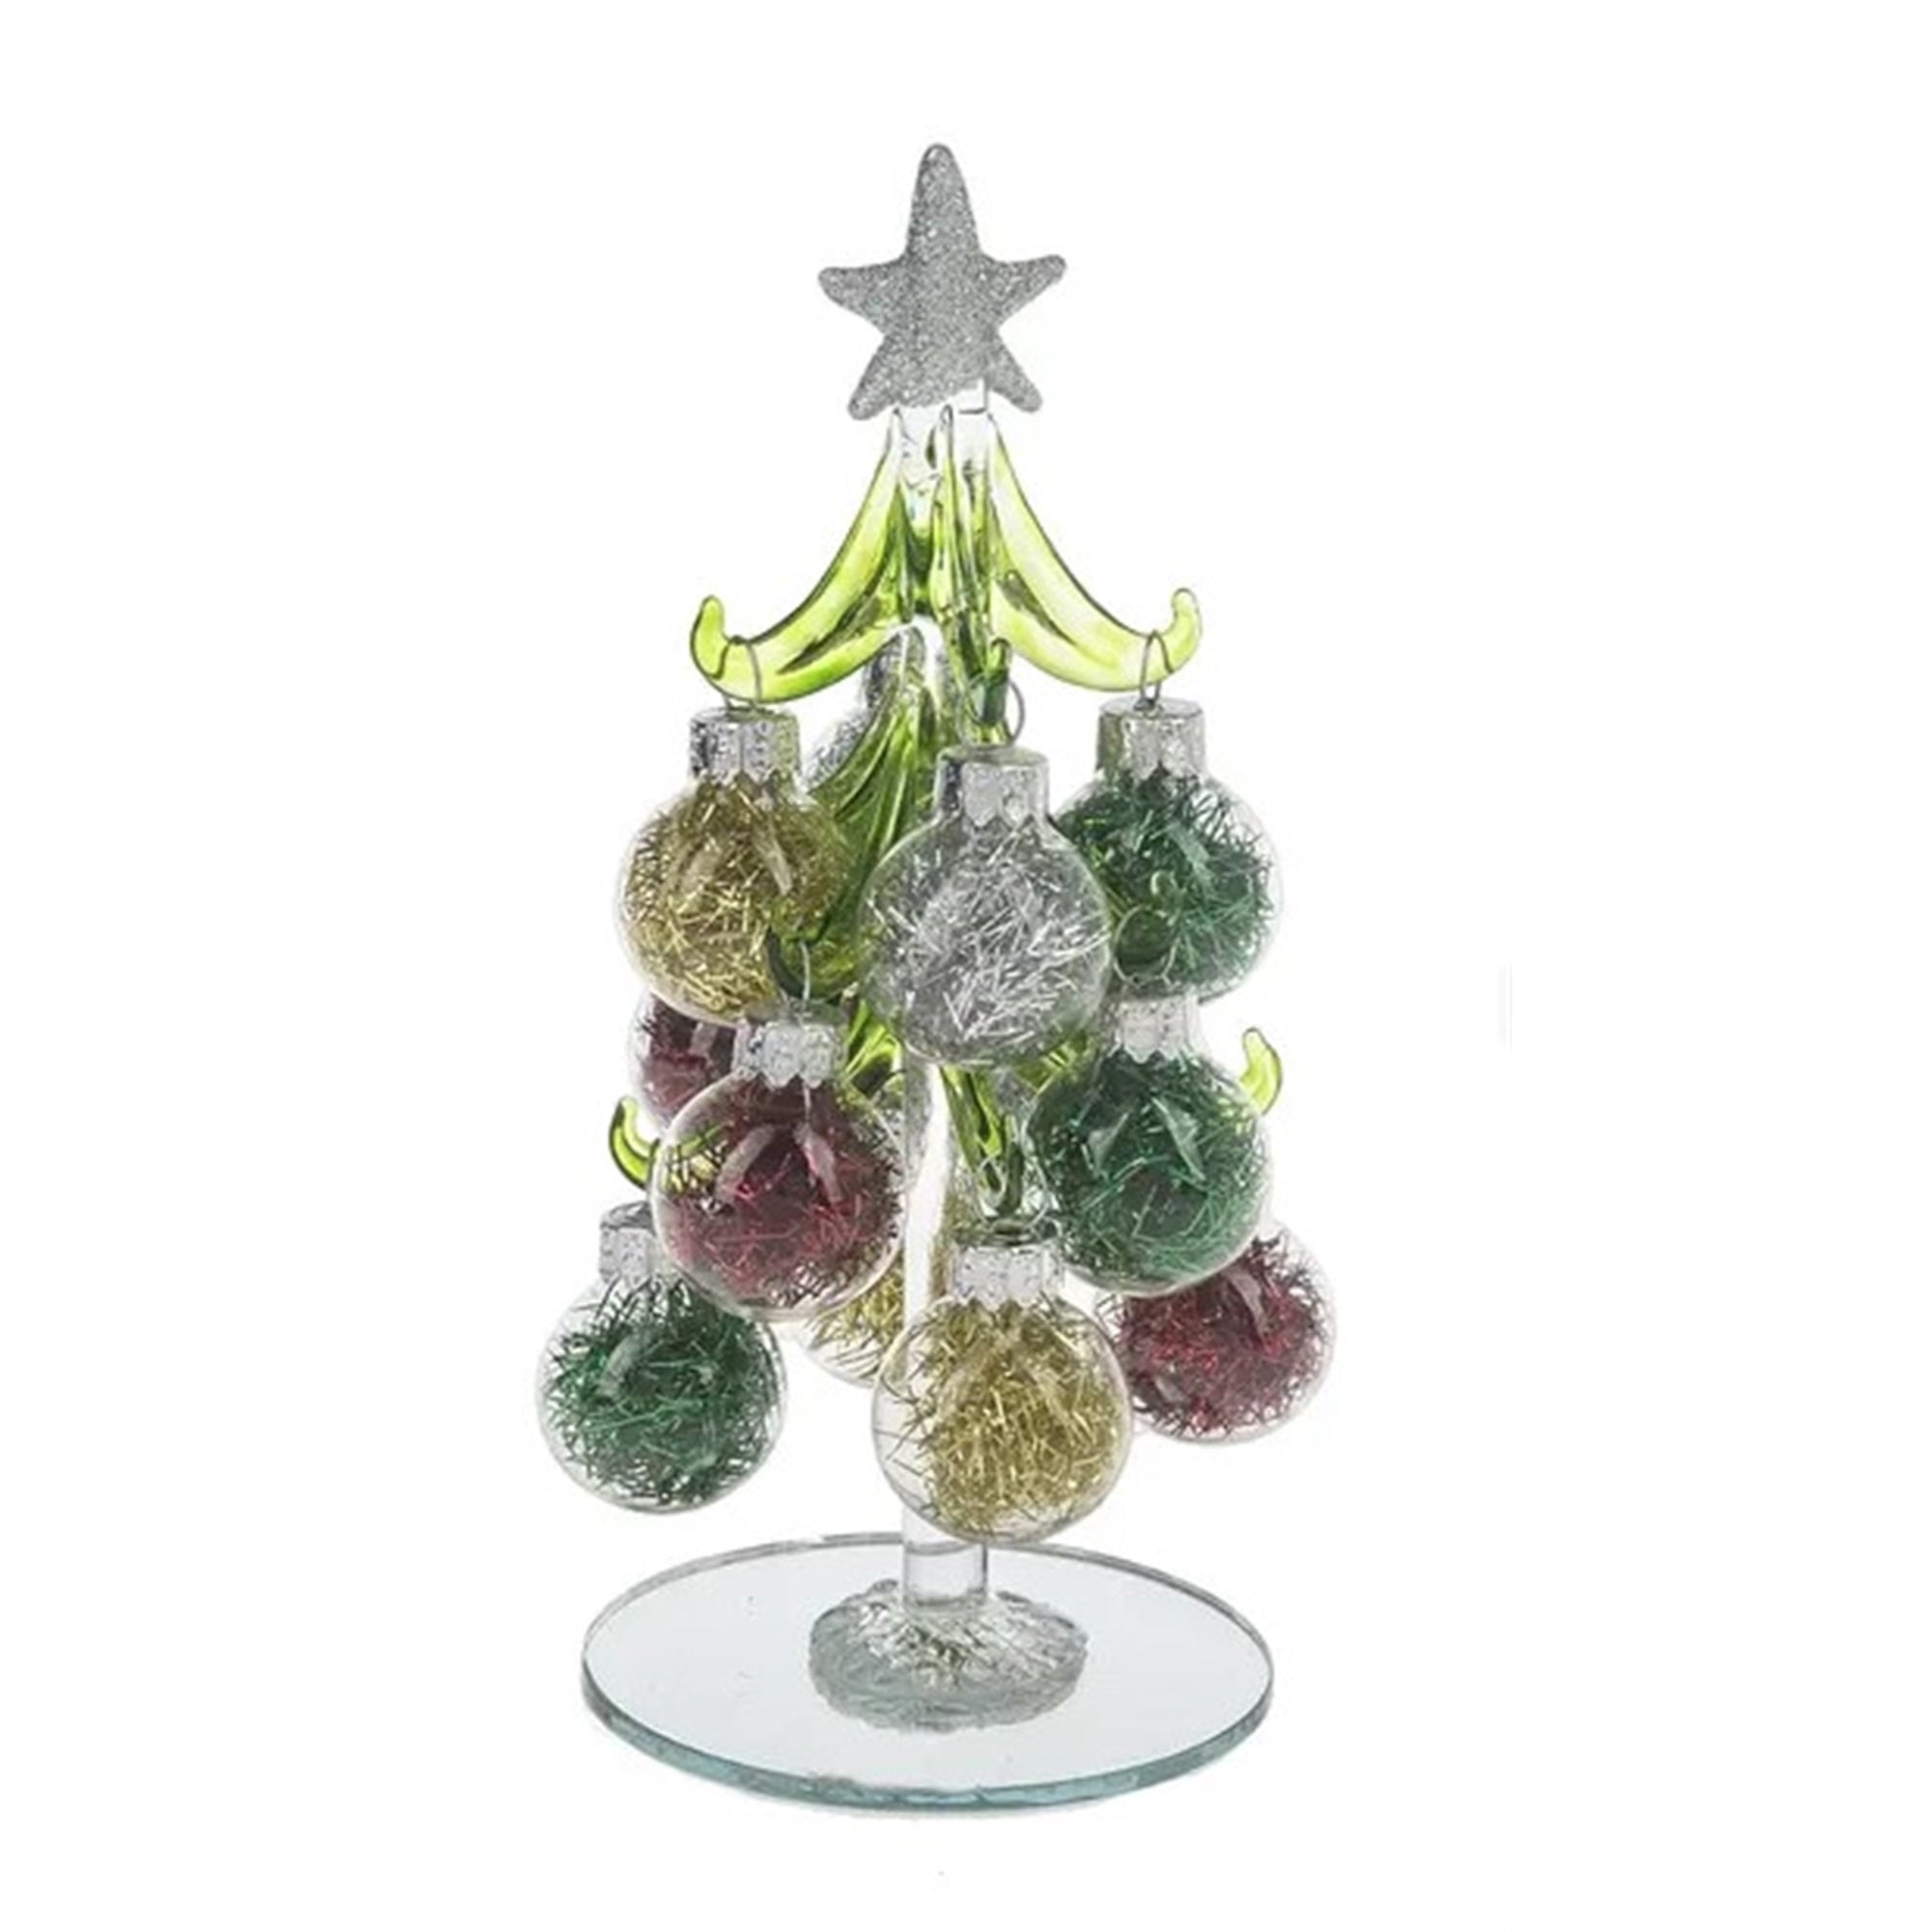 Ganz (#29342) Medium Christmas Trees With Assorted Ball Ornaments, Pack of 3